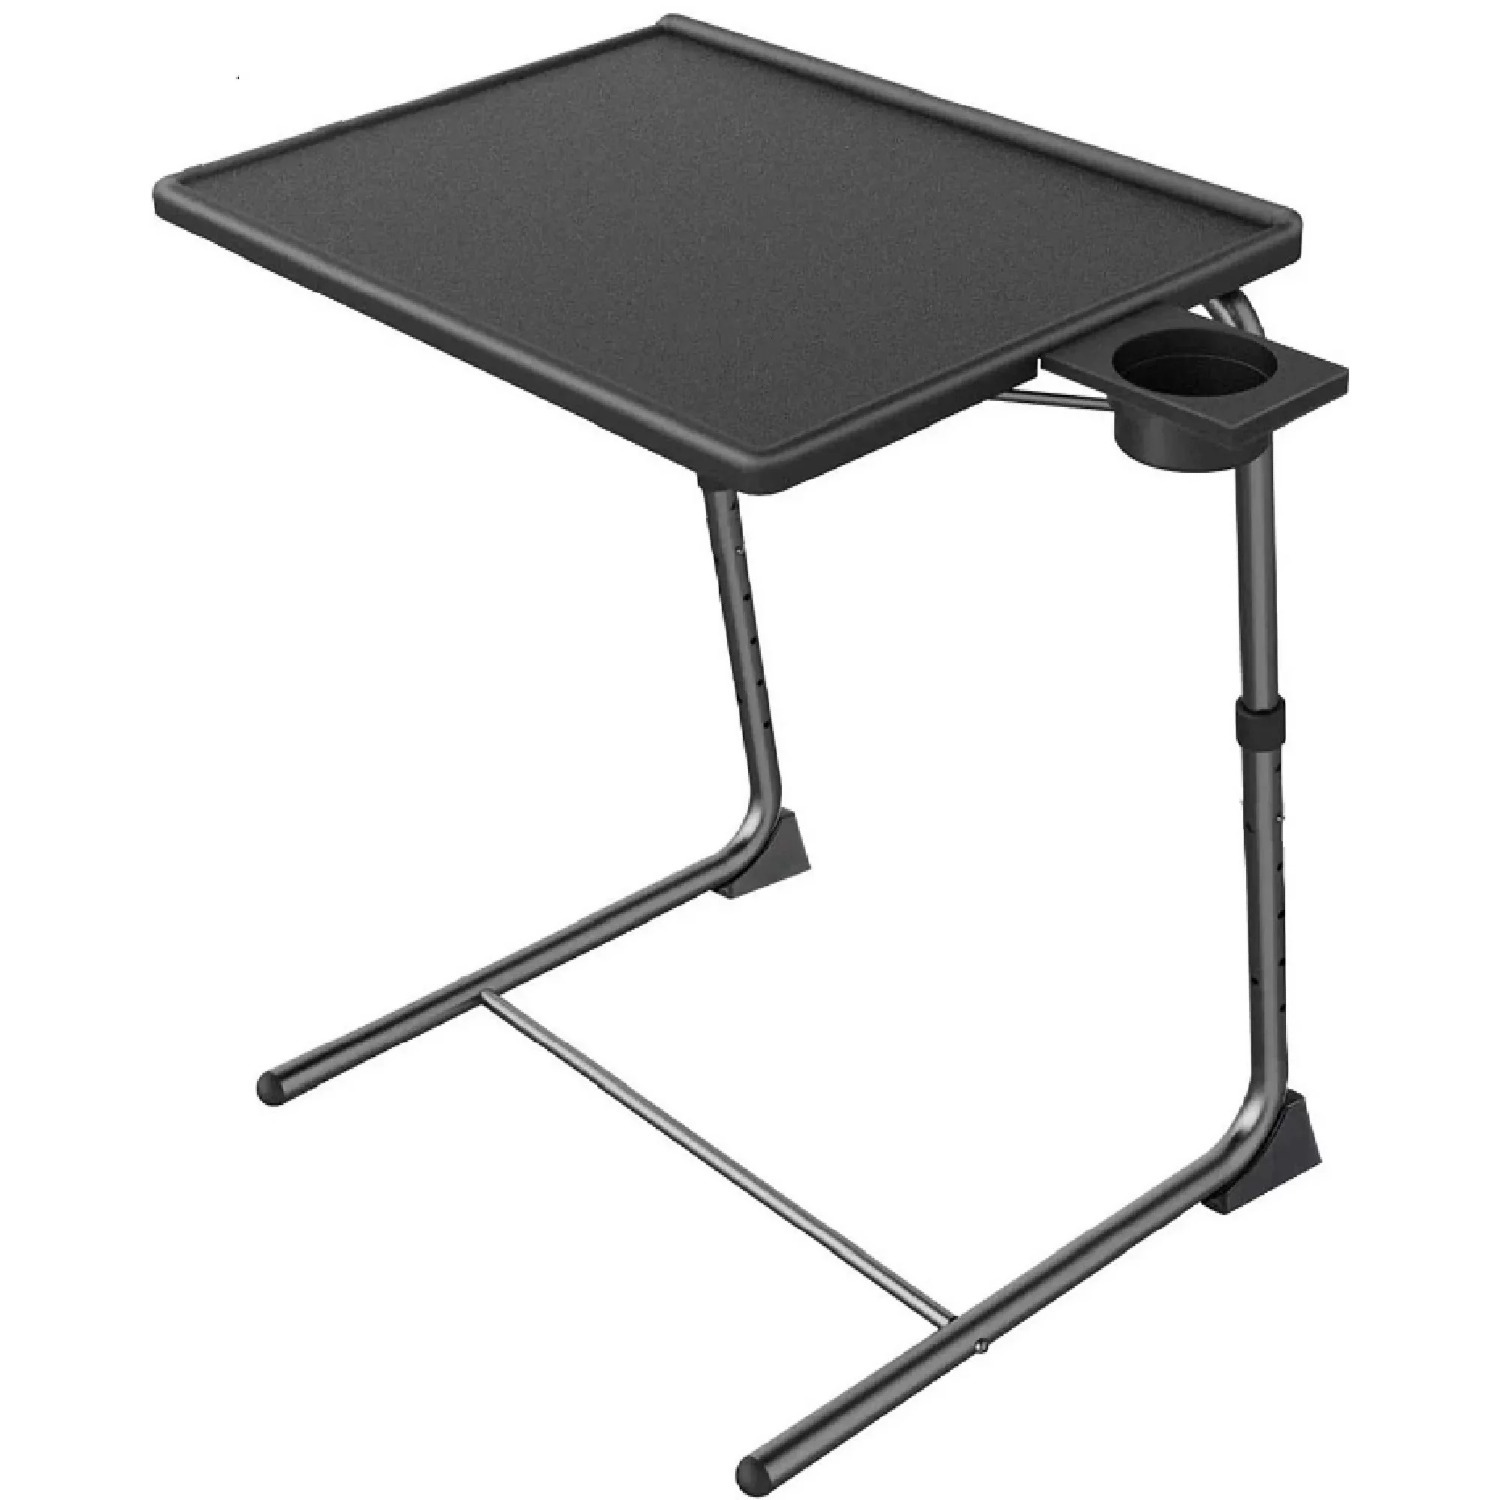 Perlegear TV Table Tray w/Cup Holder, Height & Angle Adjustments $23 + Free Shipping $22.99